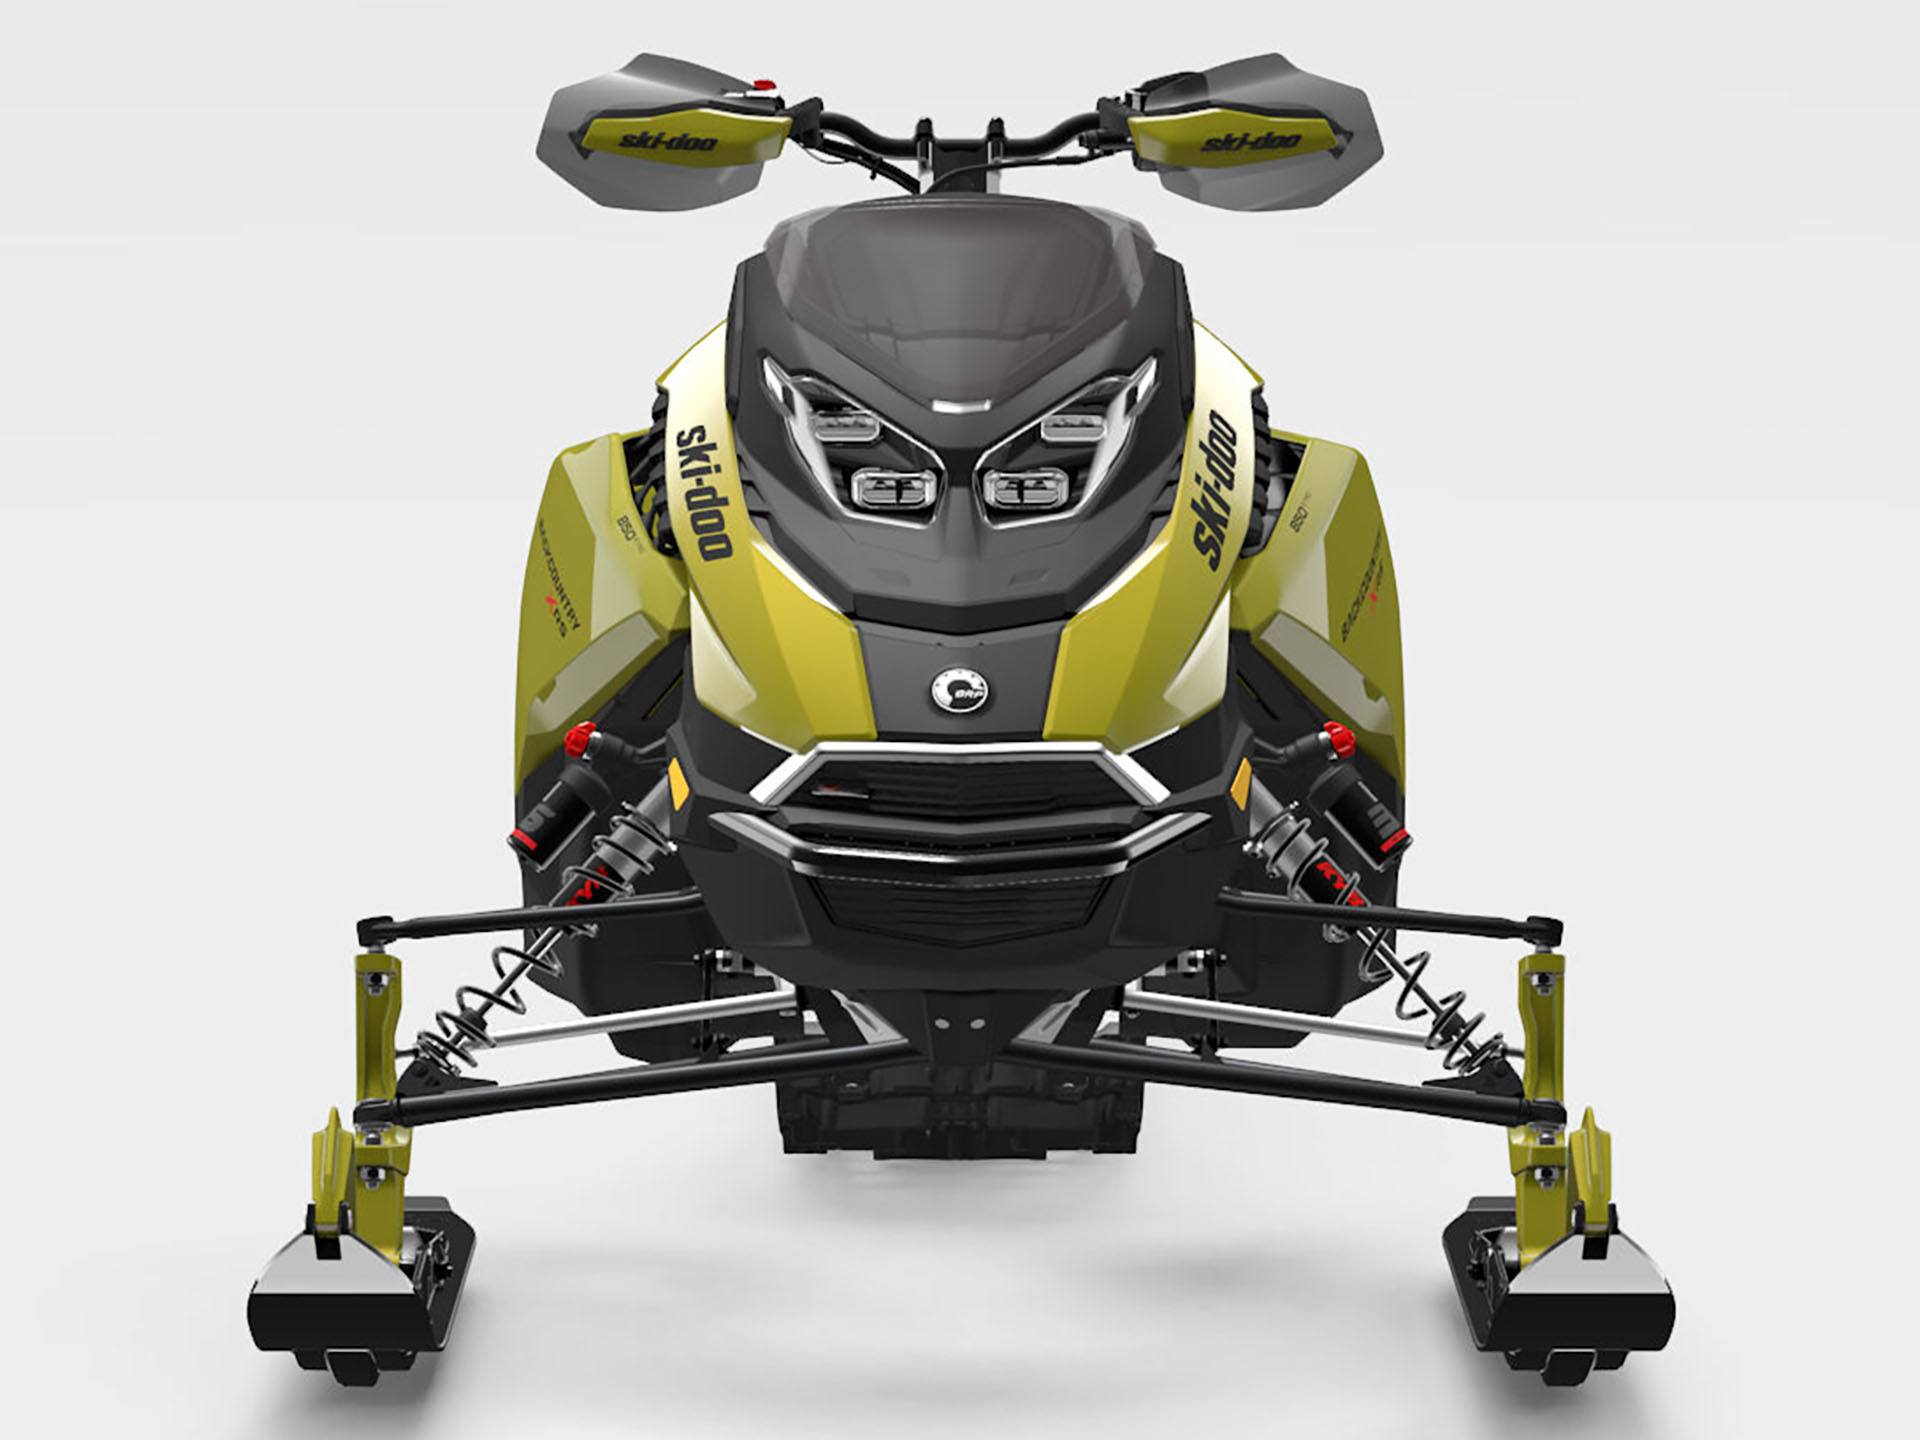 2025 Ski-Doo Backcountry X-RS 146 850 E-TEC ES Storm 150 1.5 Ski Stance 43 in. w/ 10.25 in. Touchscreen in Lancaster, New Hampshire - Photo 4